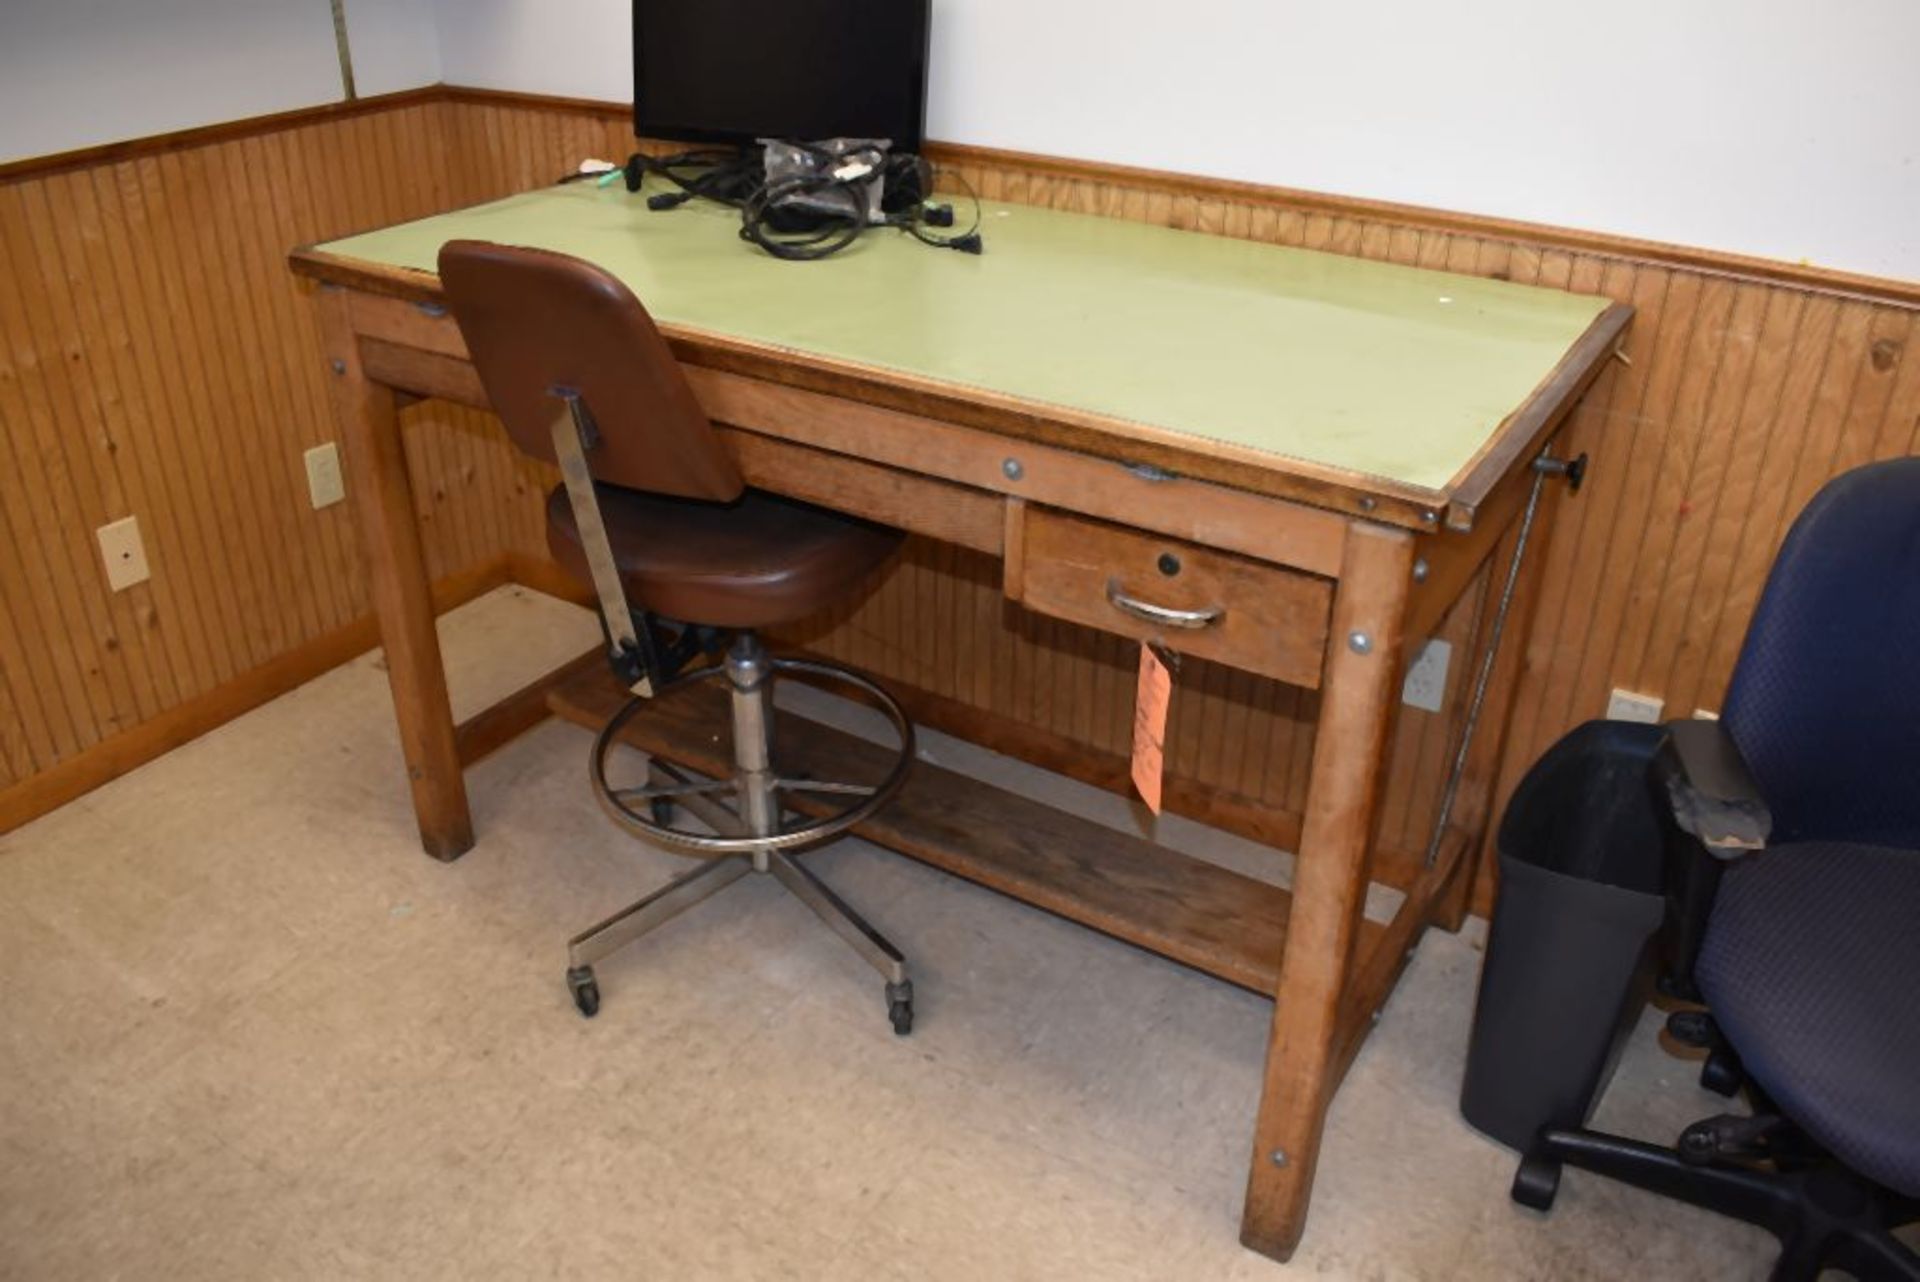 WOOD DRAFTING TABLE WITH CHAIR, 30"D x 5'L x 38"H